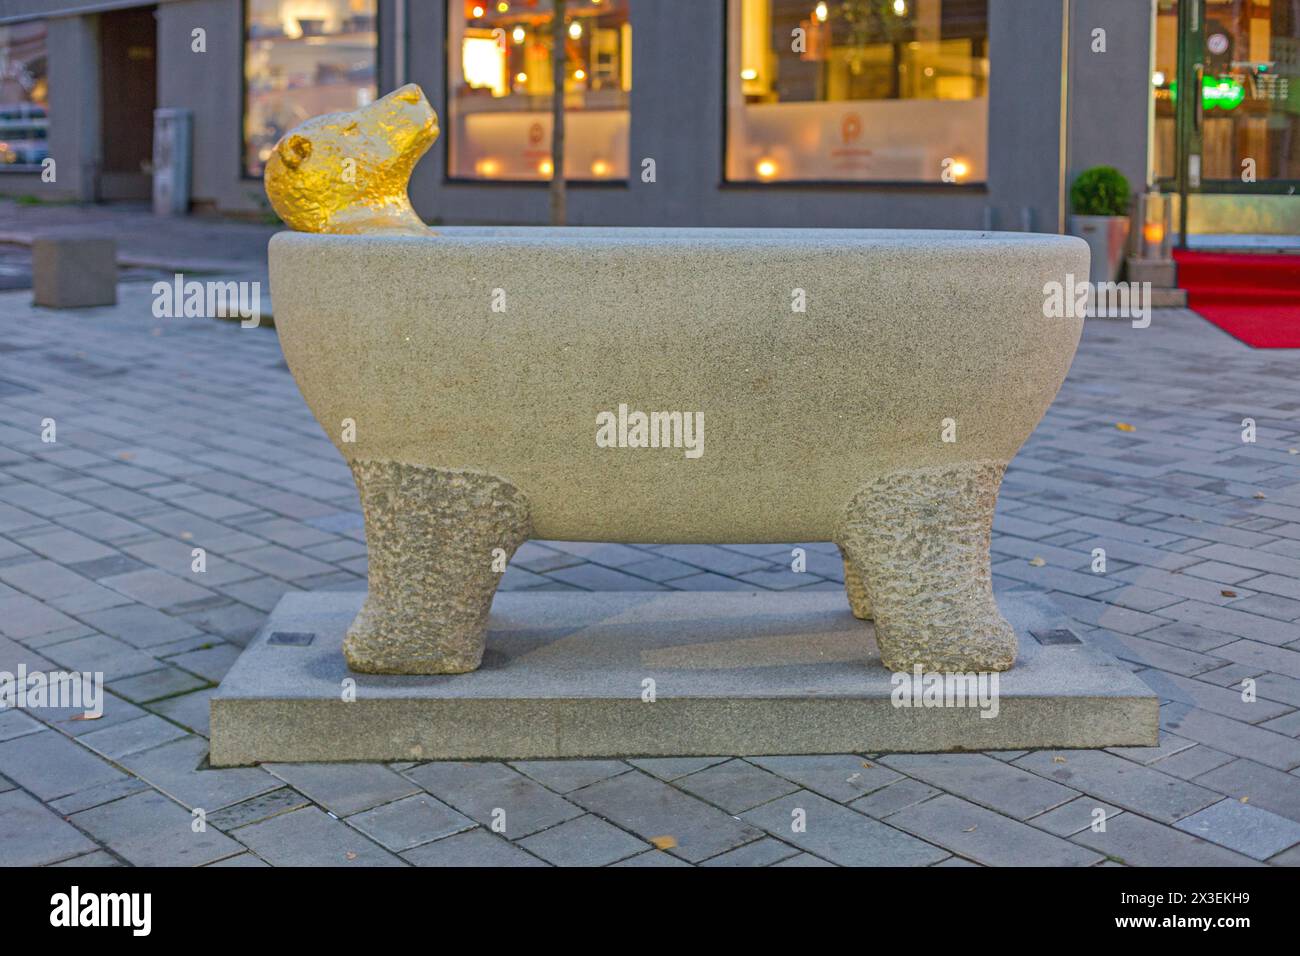 Sarpsborg, Norway - October 27, 2016: Sculpture of Gold Bear in Free Standing Bathtub at Sankt Marie Gate Autumn Evening. Stock Photo